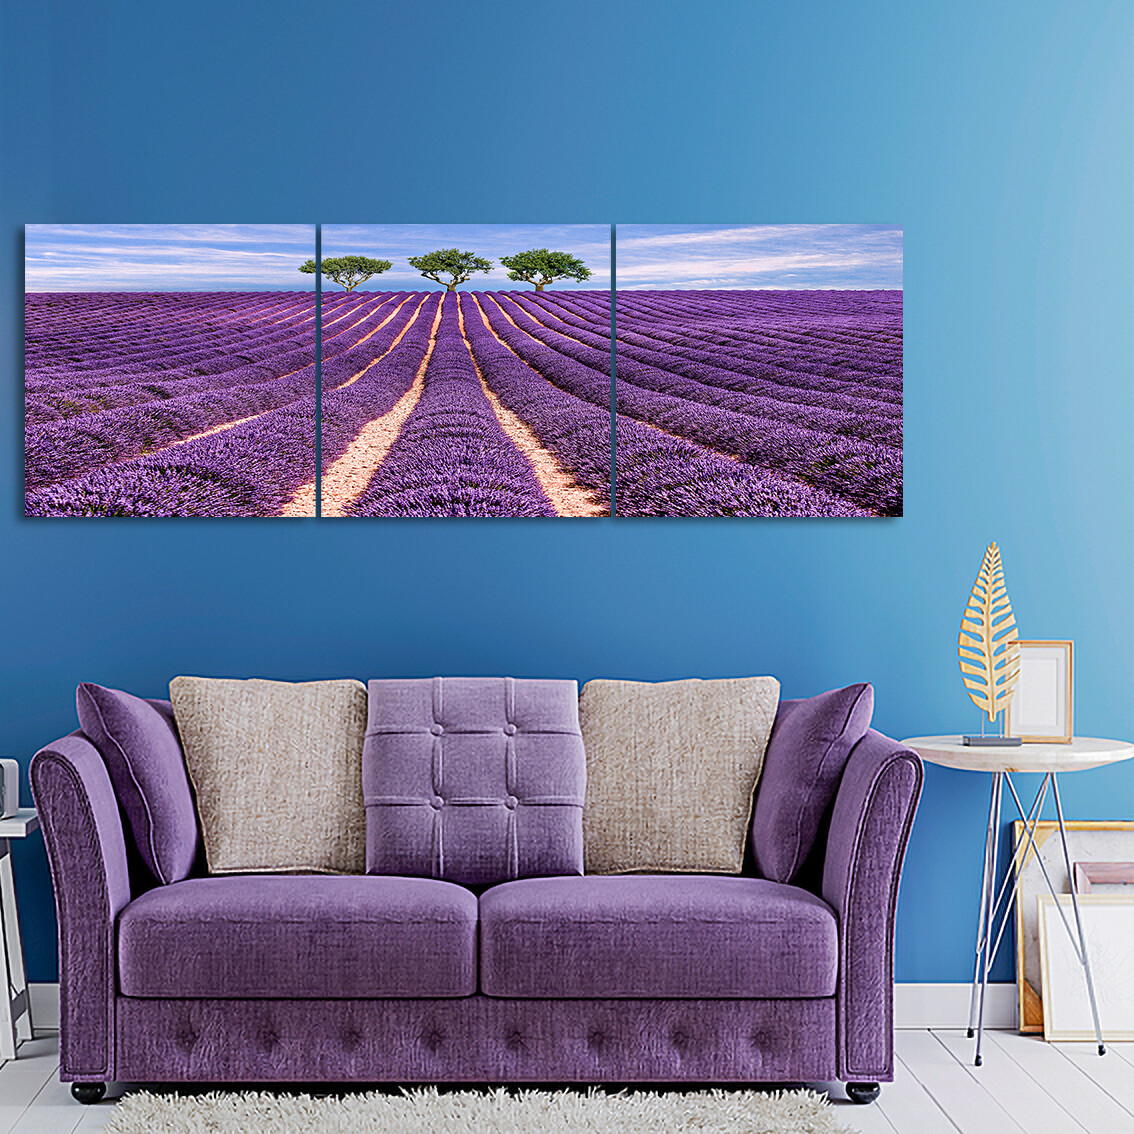 Lavender field (3 Panels) - Modern Luxury Wall art Printed on Acrylic Glass - Frameless and Ready to Hang